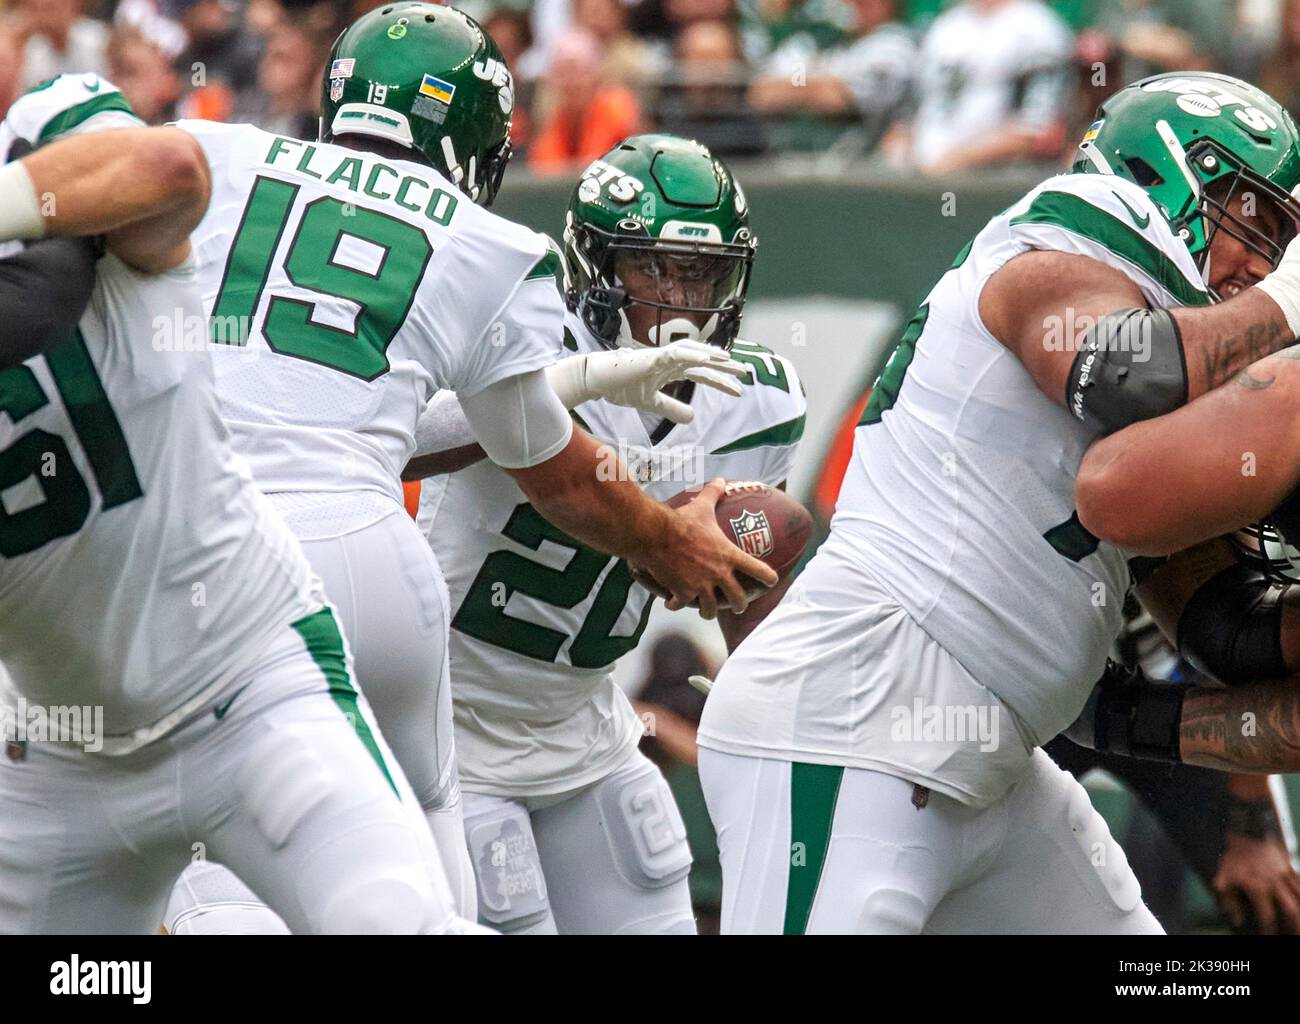 East Rutherford, New Jersey, USA. 25th Sep, 2022. New York Jets quarterback Joe Flacco (19) hands off to running back Breece Hall (20) against the Cincinnati Bengals during a NFL game at MetLife Stadium in East Rutherford, New Jersey on Sunday September 25, 2022. Duncan Williams/CSM/Alamy Live News Stock Photo